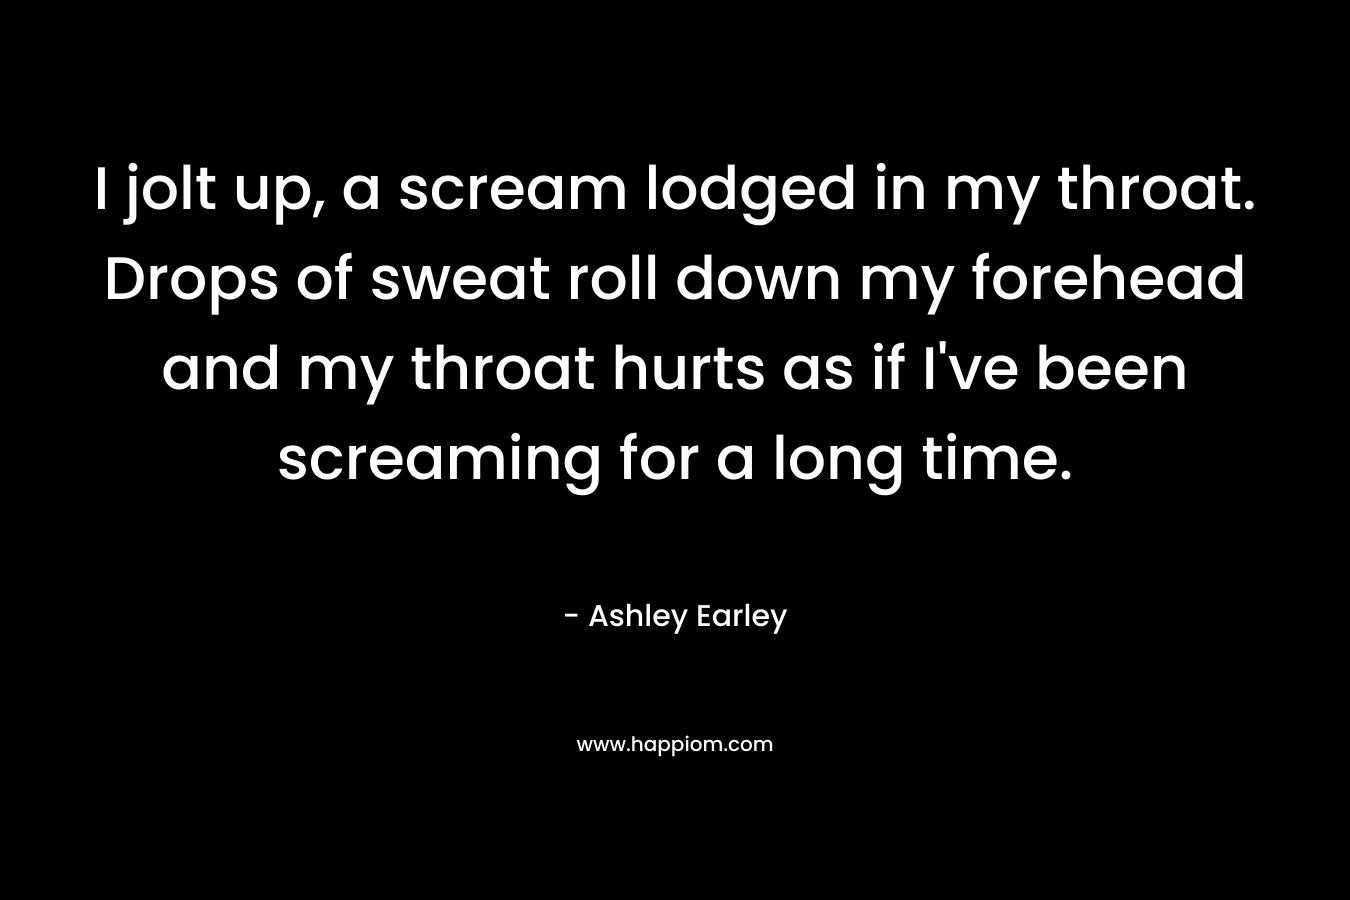 I jolt up, a scream lodged in my throat. Drops of sweat roll down my forehead and my throat hurts as if I’ve been screaming for a long time. – Ashley Earley